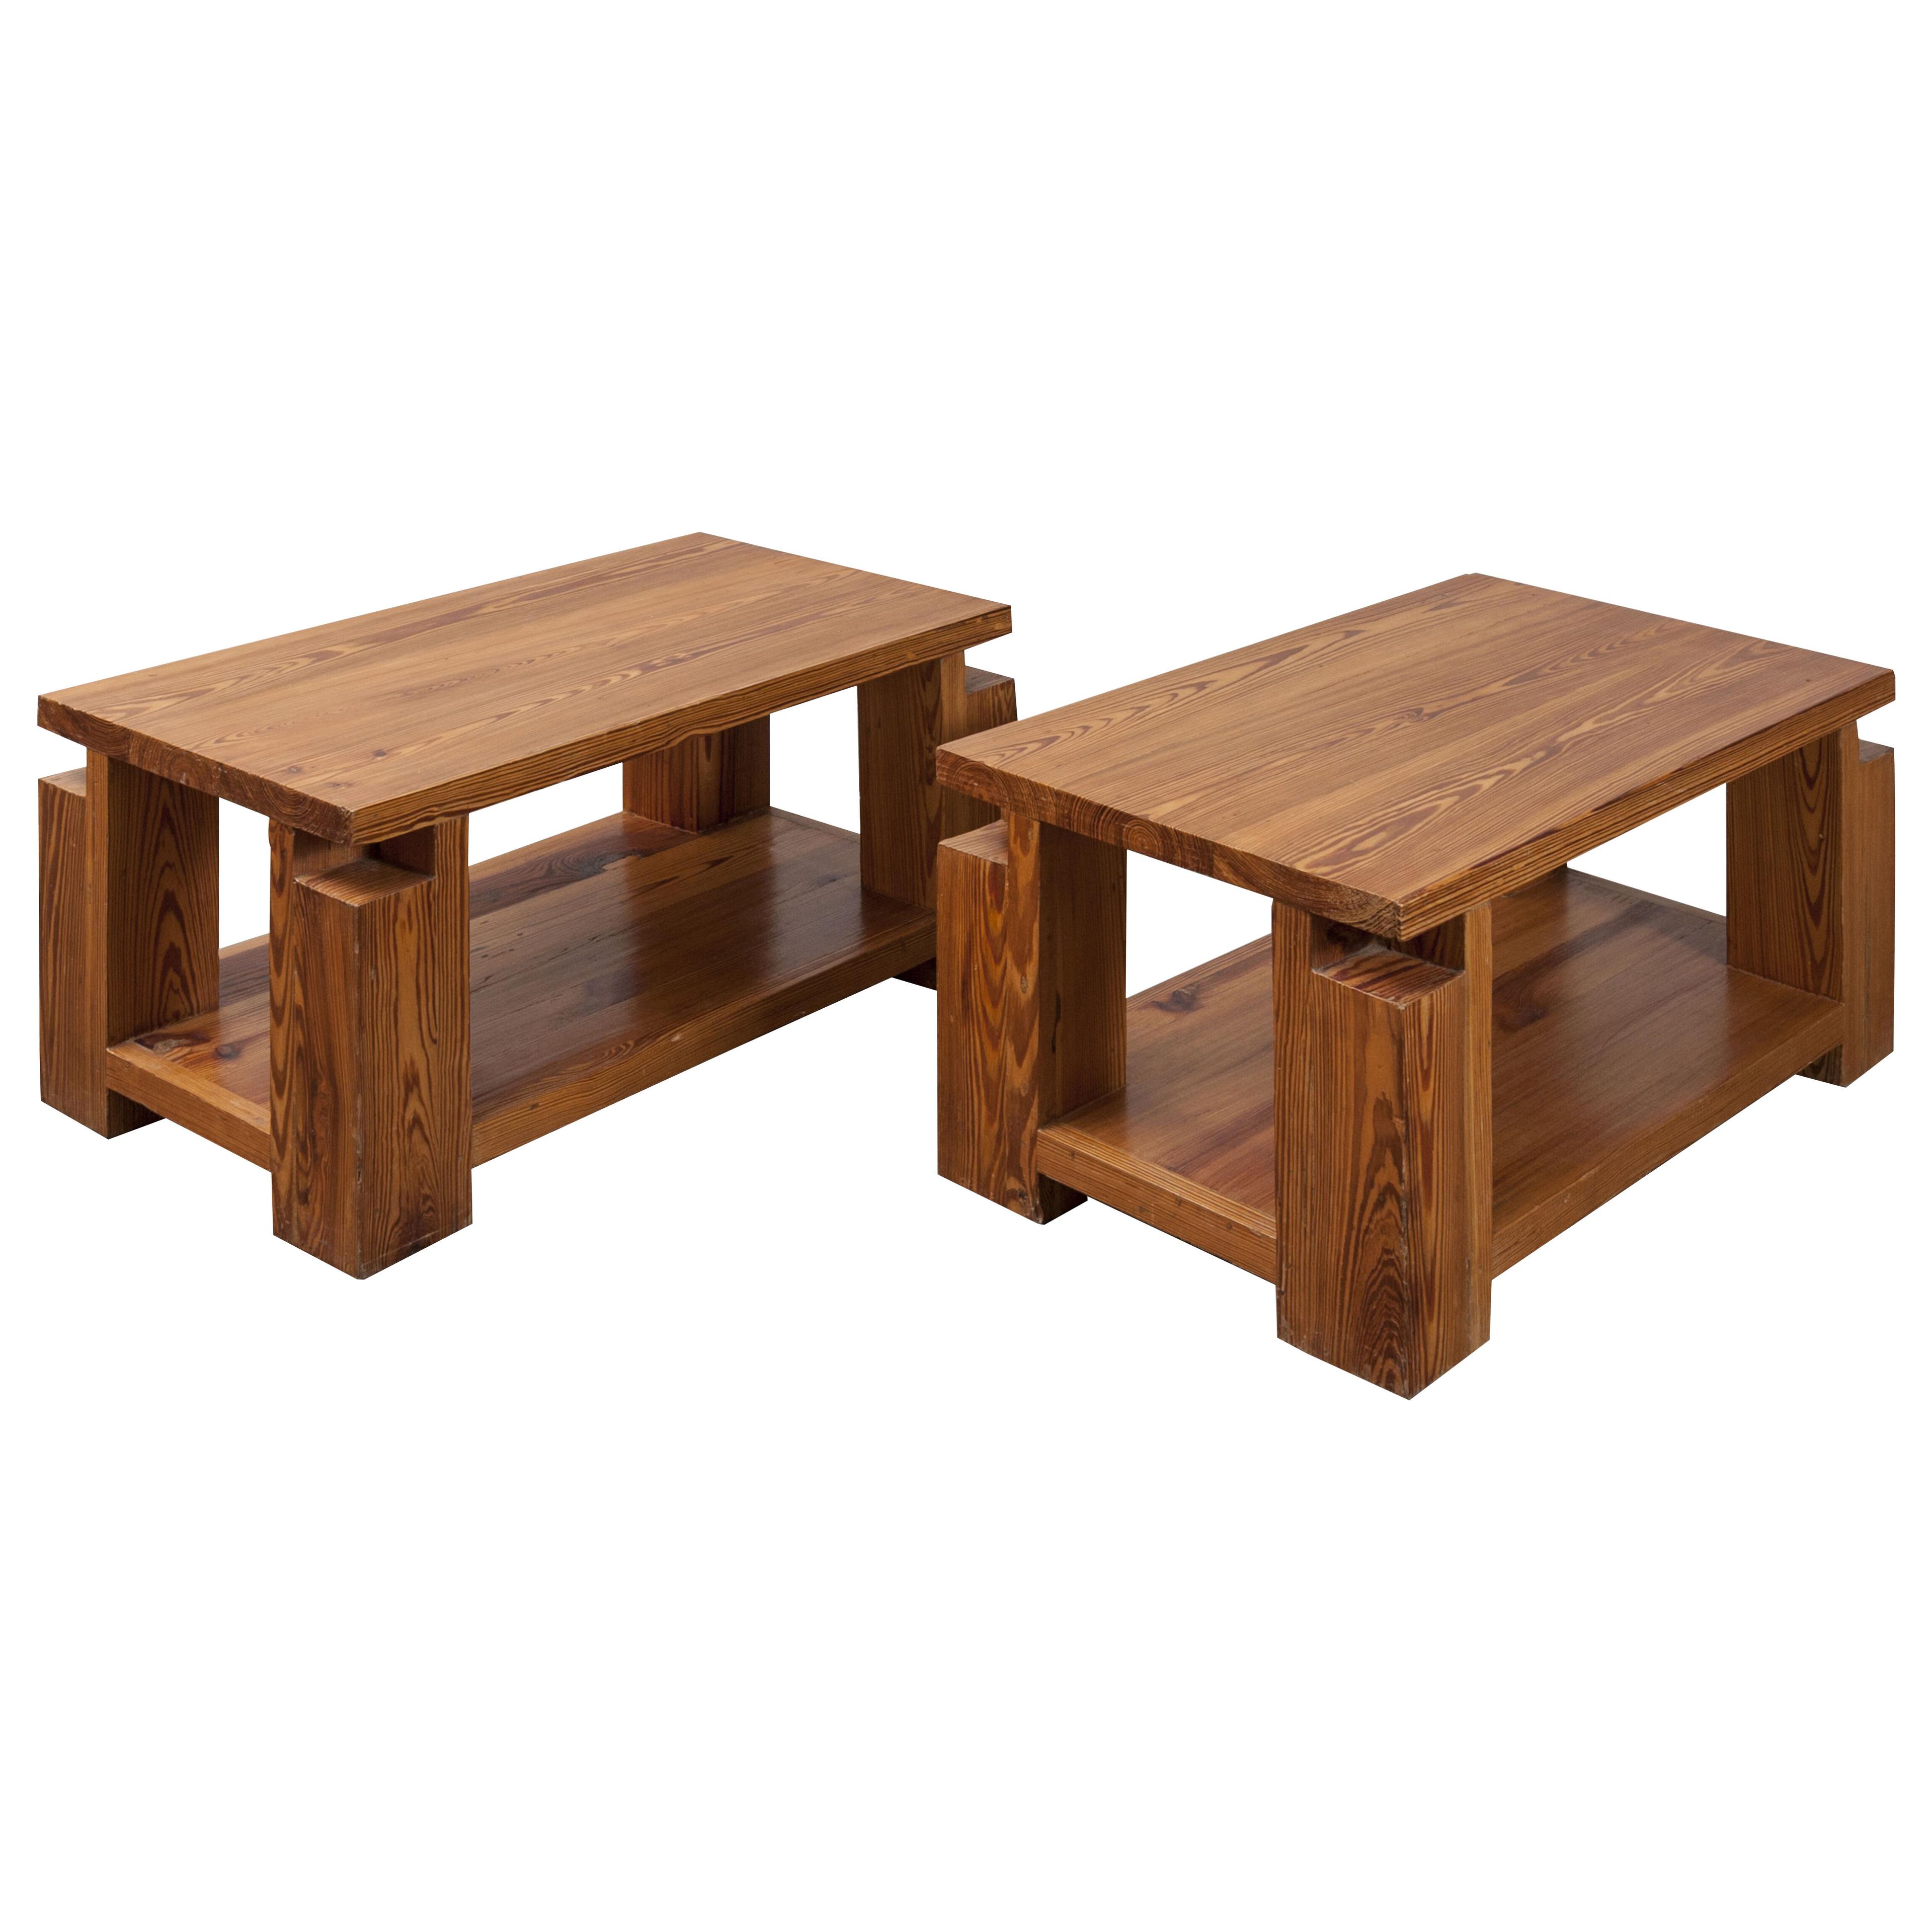 Pair of "Chalet"  Pine Wood Tables, 1960's.